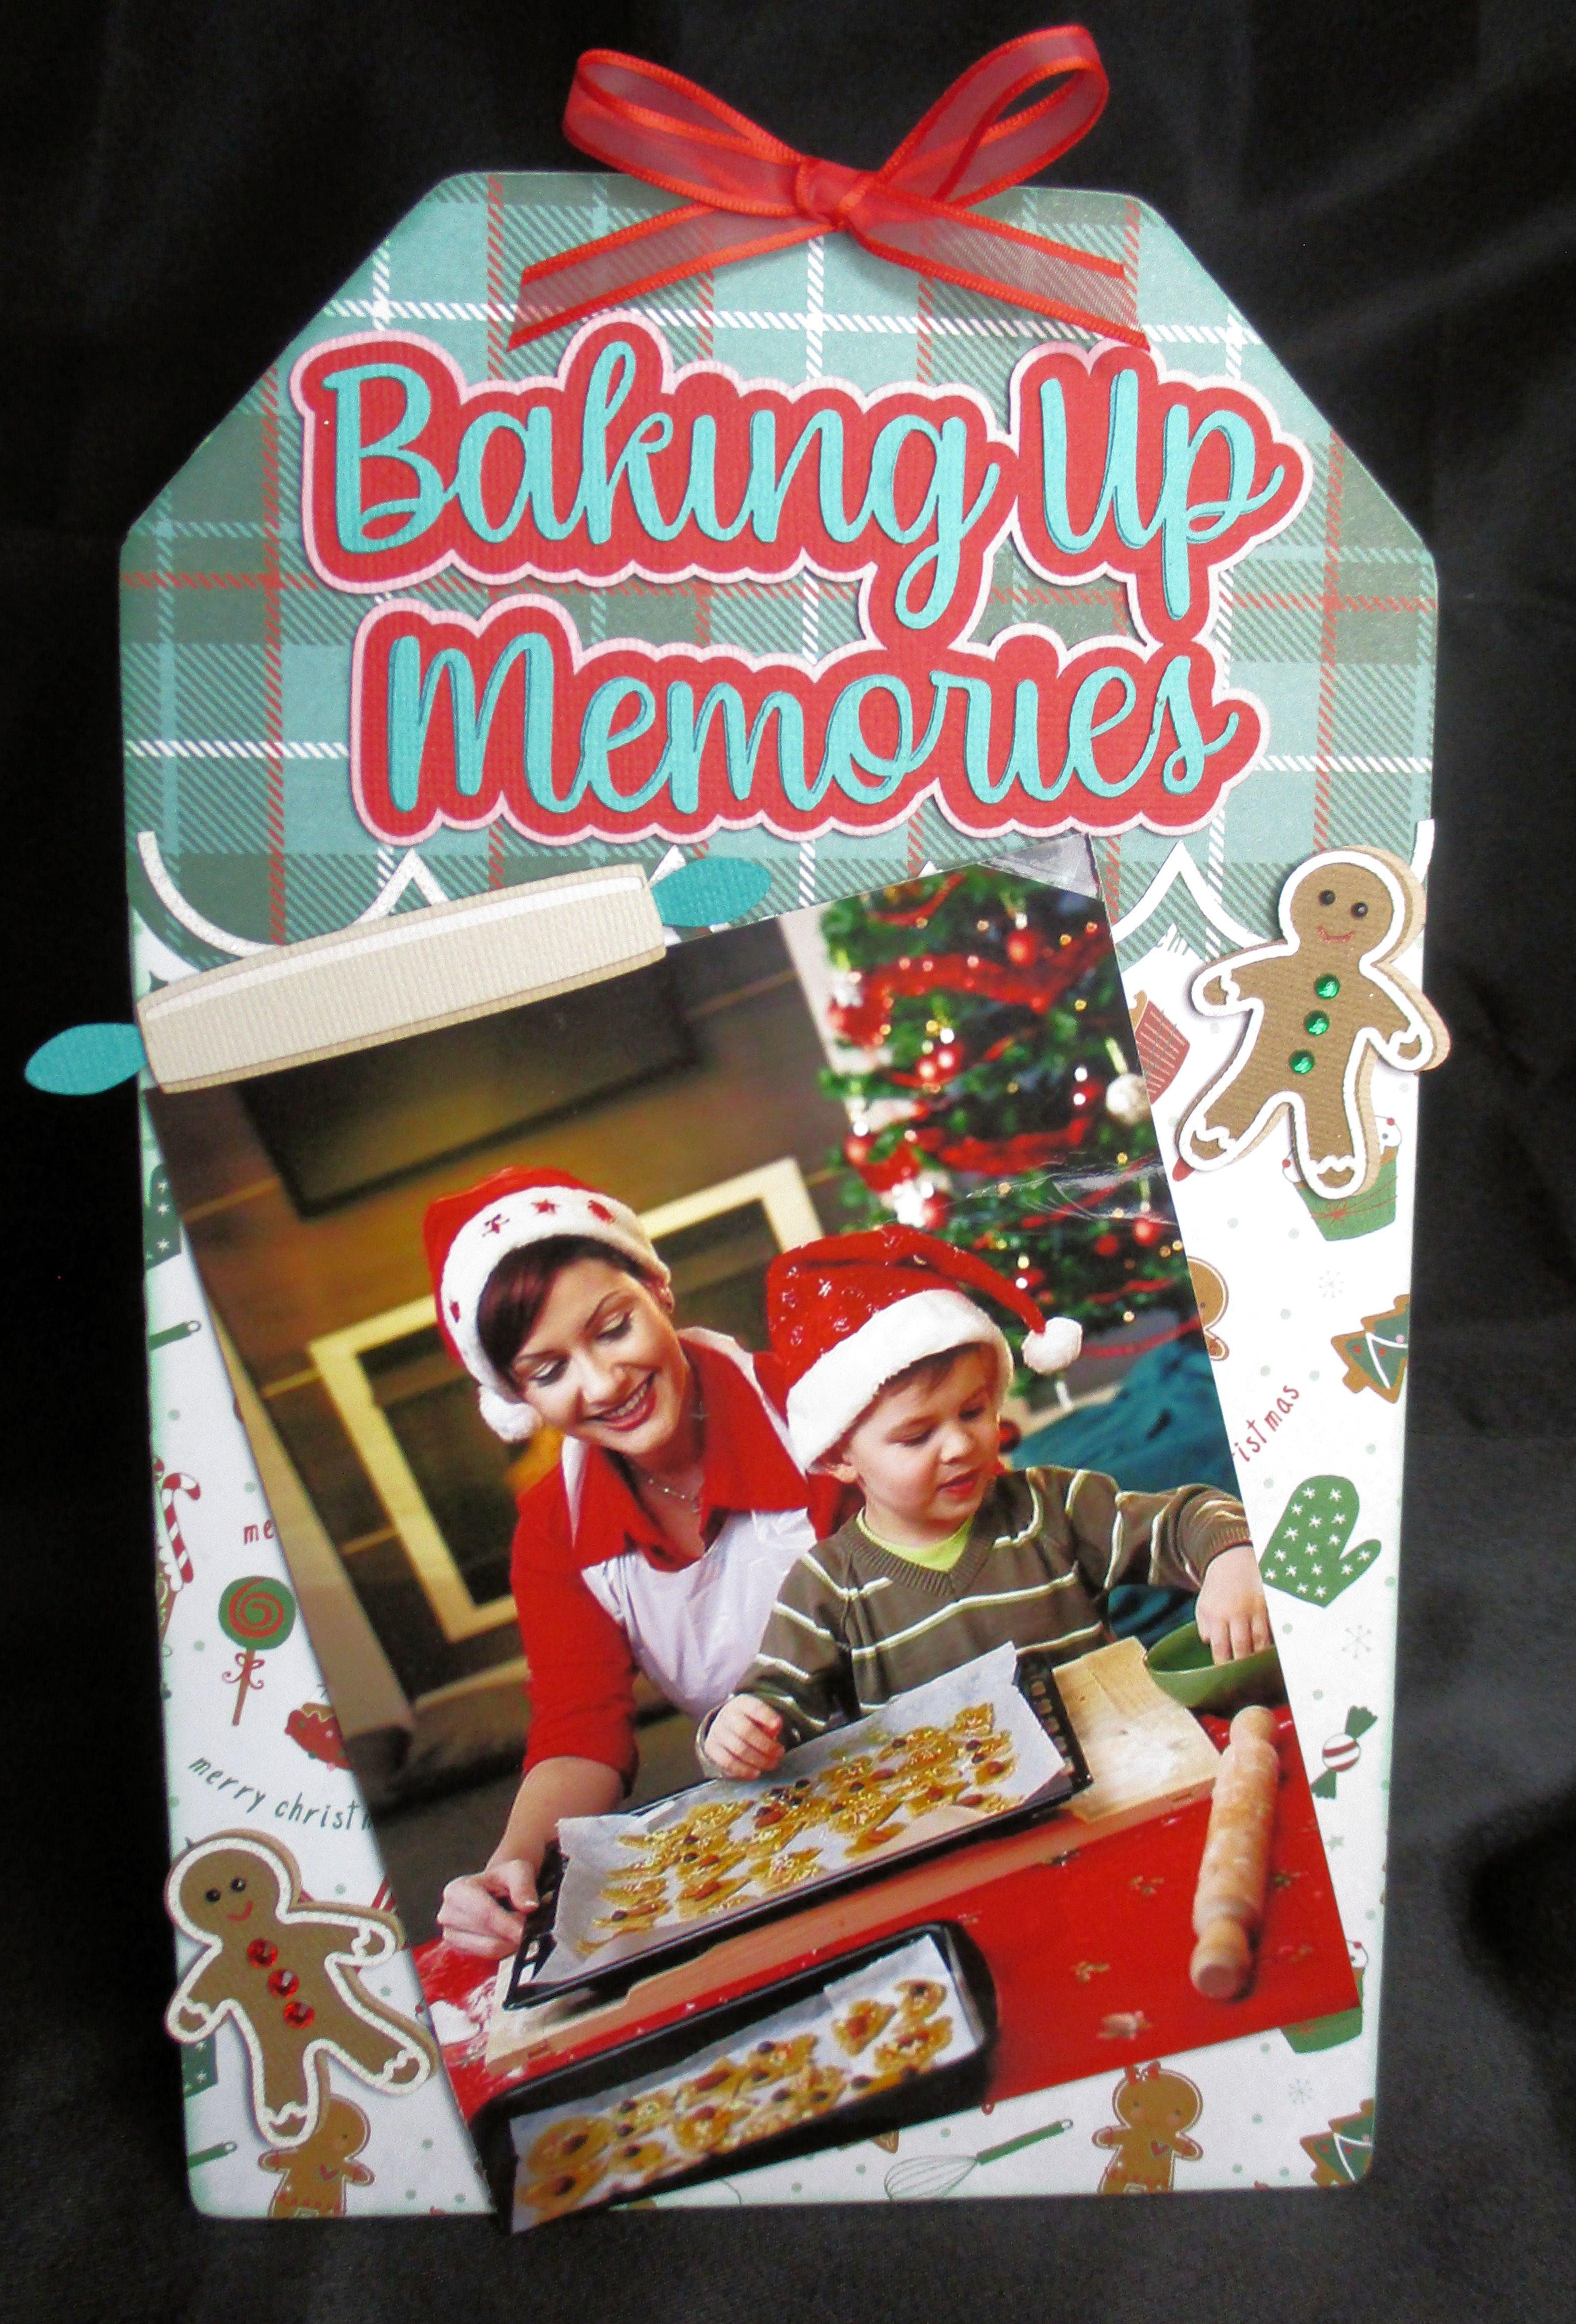 Baking Up Memories 6.5 x 10 Interactive, Magnetic Photo Frame & Accessory Magnets by SSC Designs